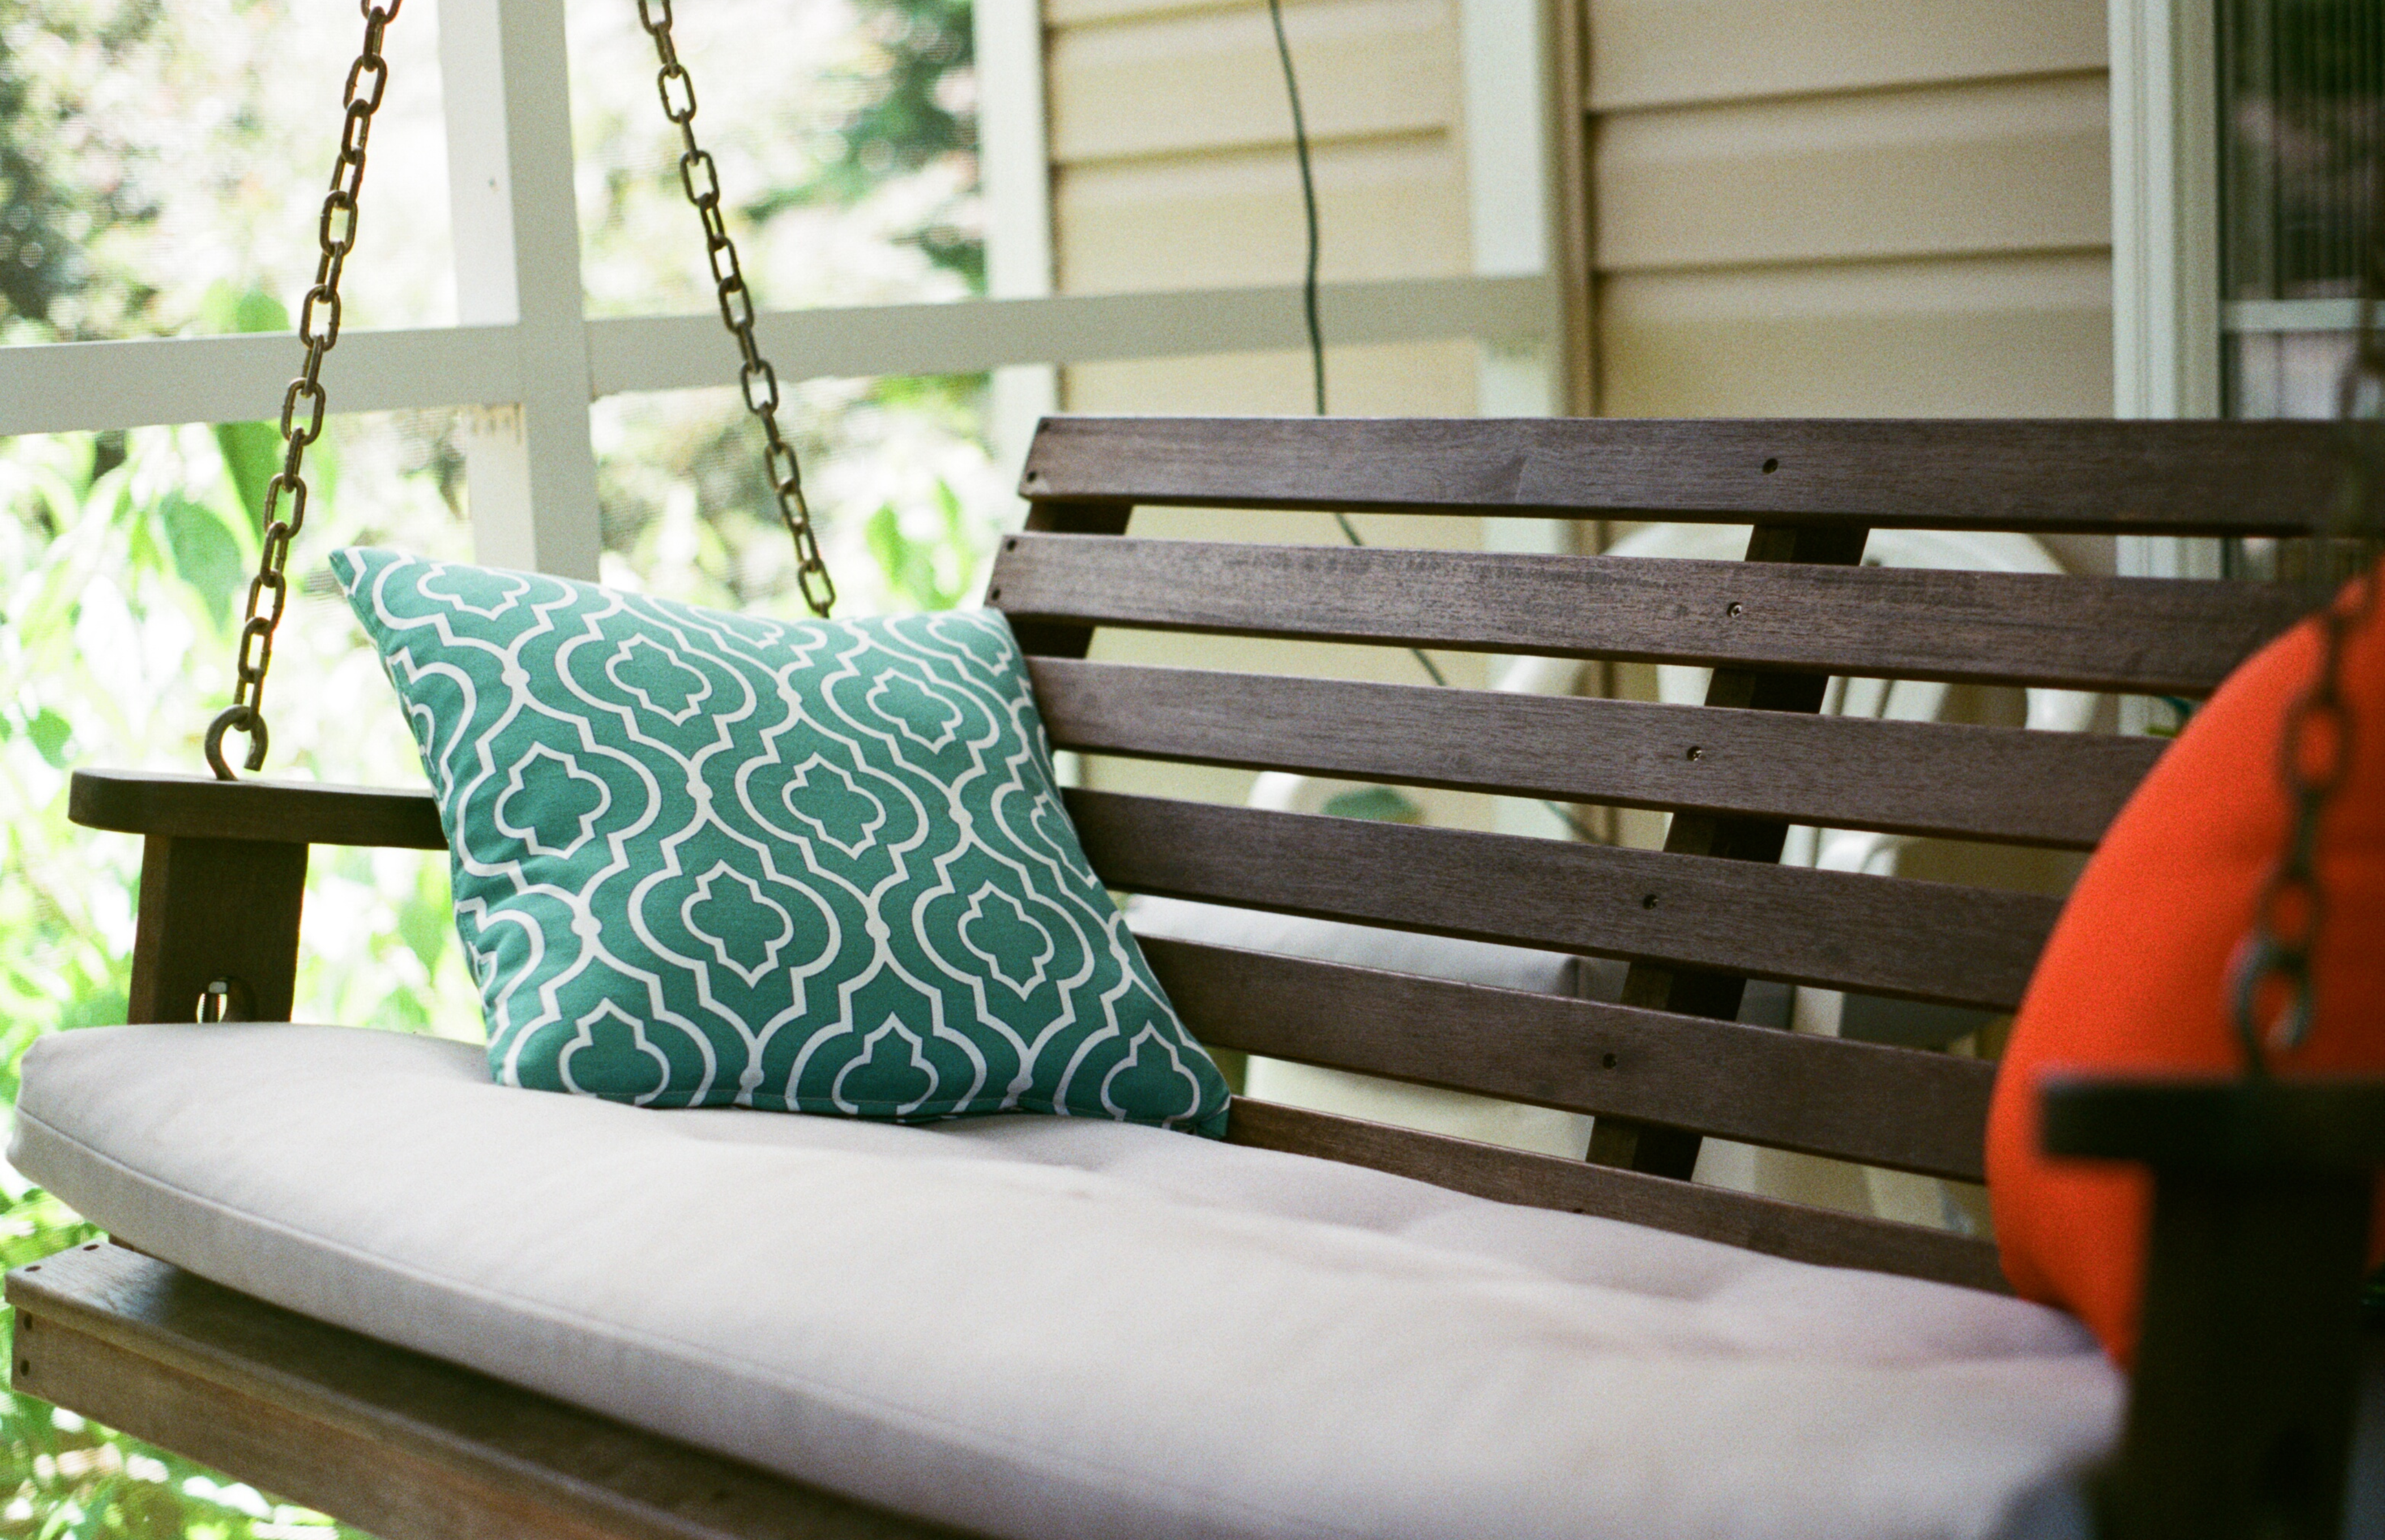 A classic porch swing hangs from the ceiling with a few colorful cushions.